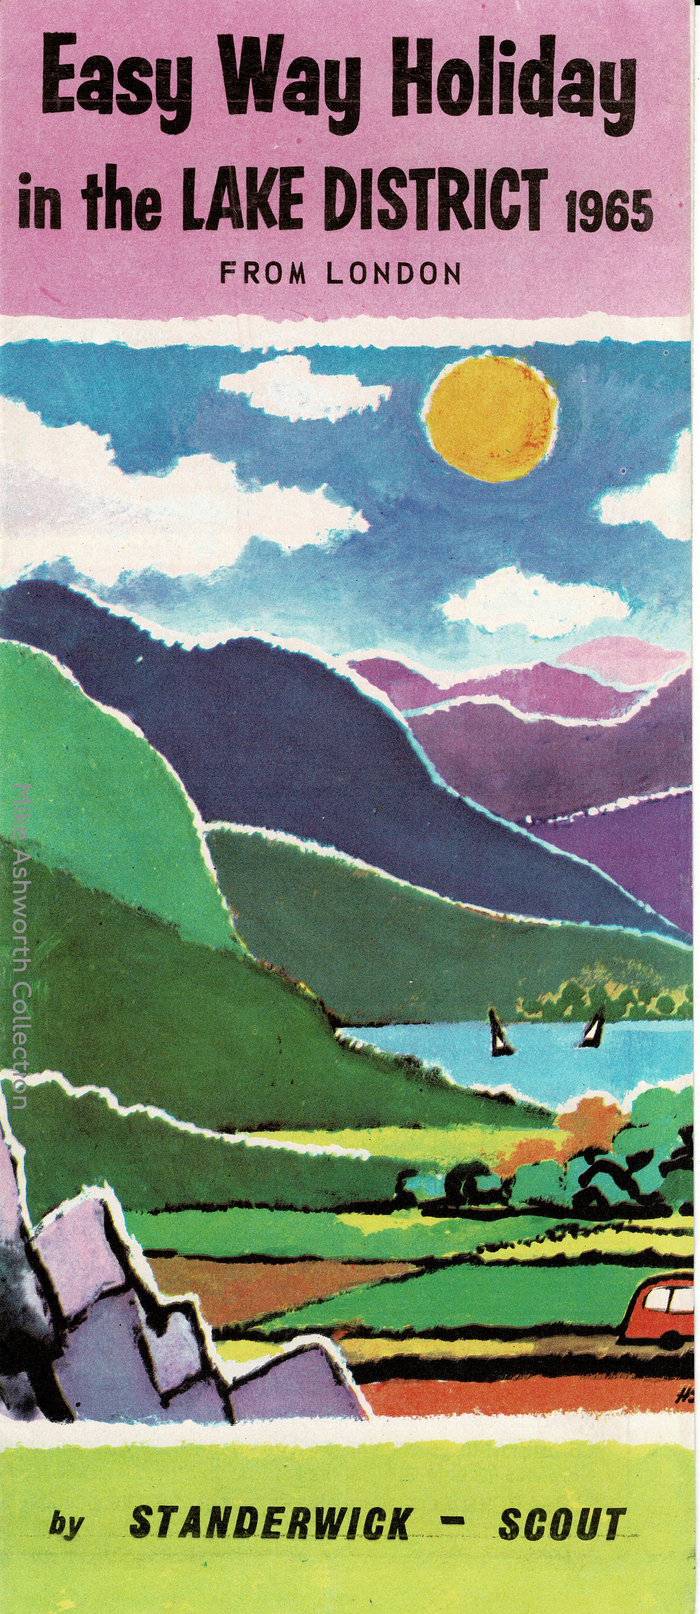 Easy Way Holiday in the Lake District 1965